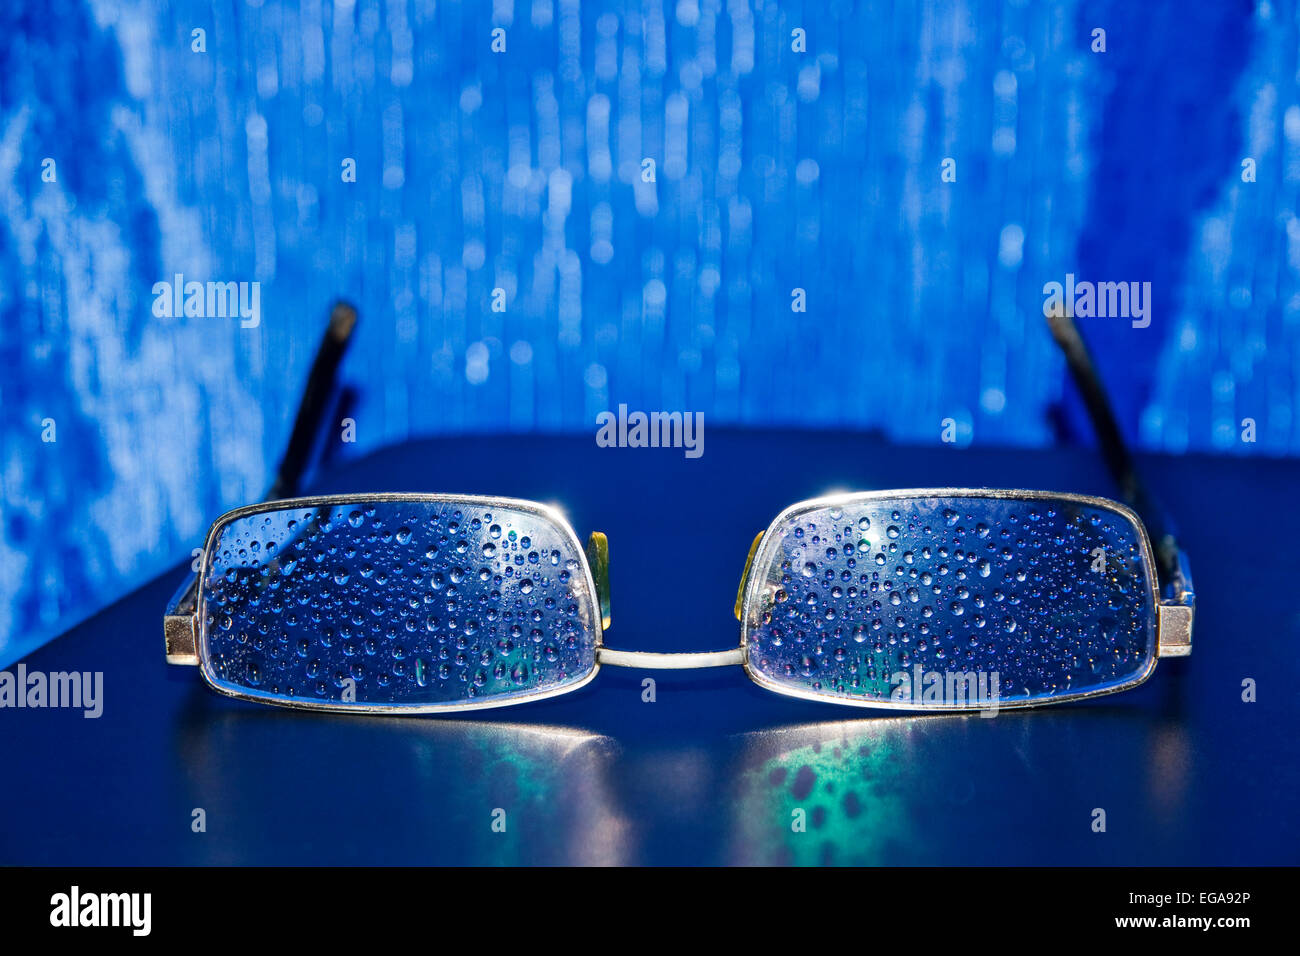 Spectacles of water droplets on the glasses Stock Photo